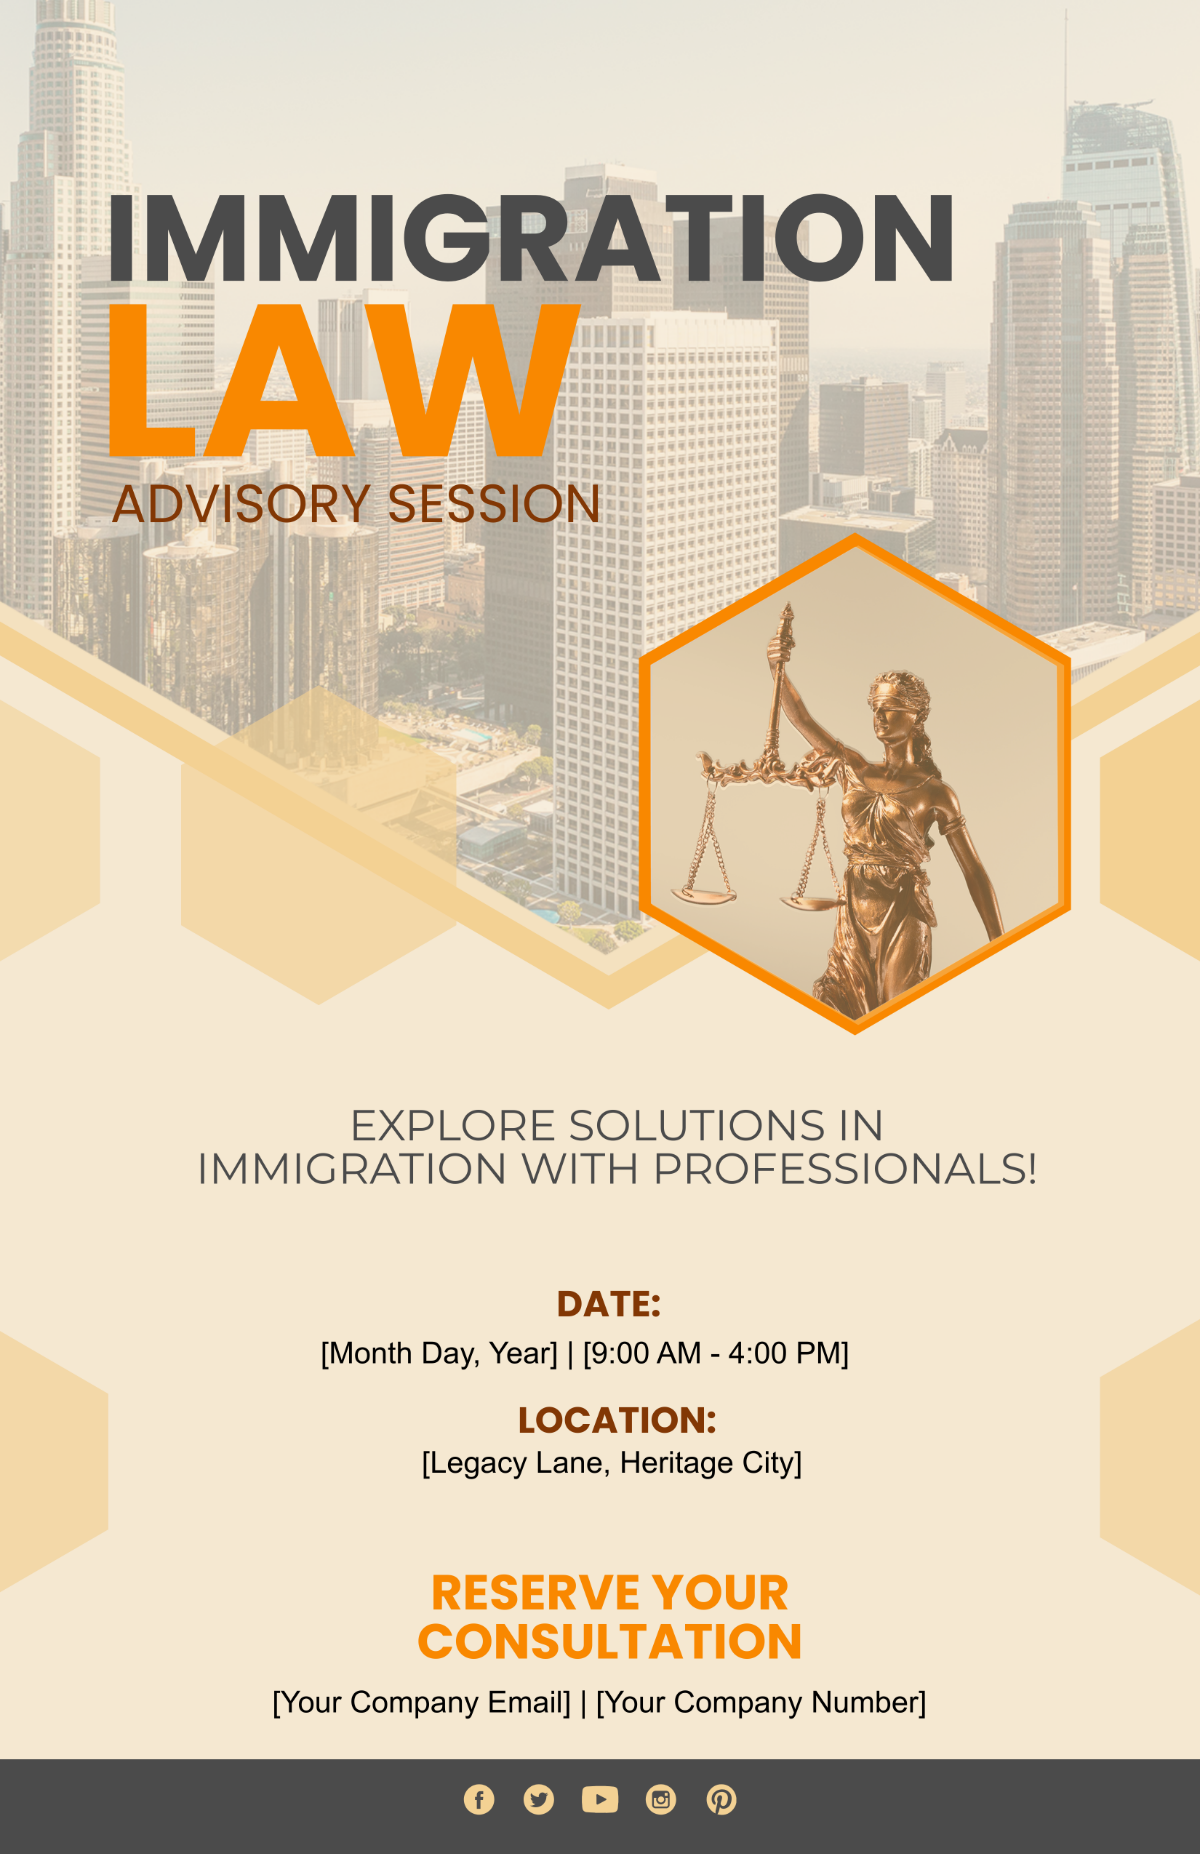 Immigration Law Advisory Session Poster Template